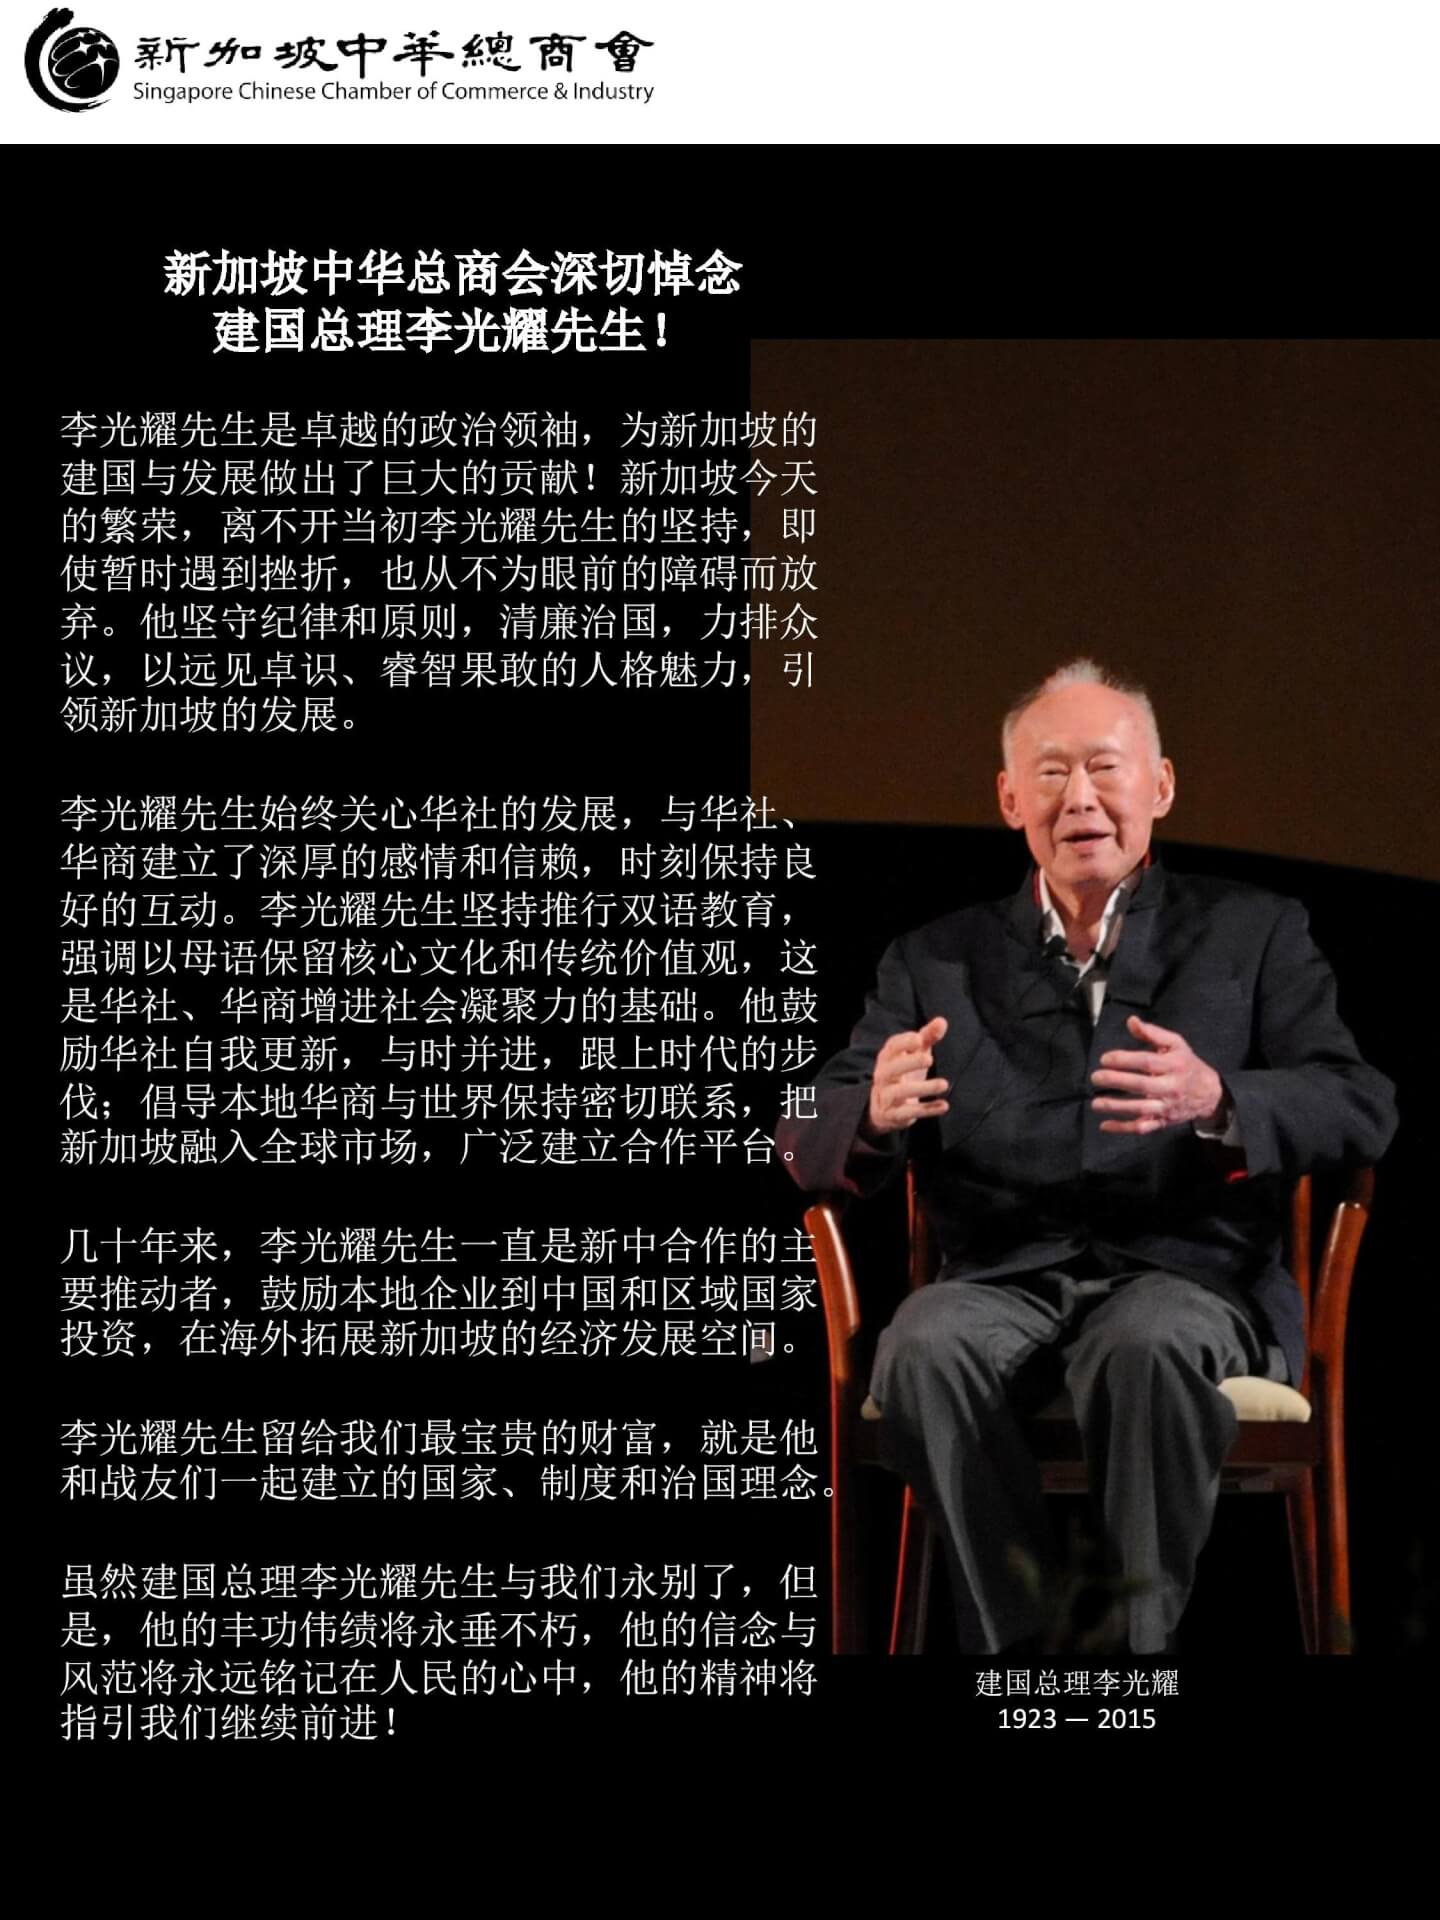 LKY Tribute _ SCCCI chinese